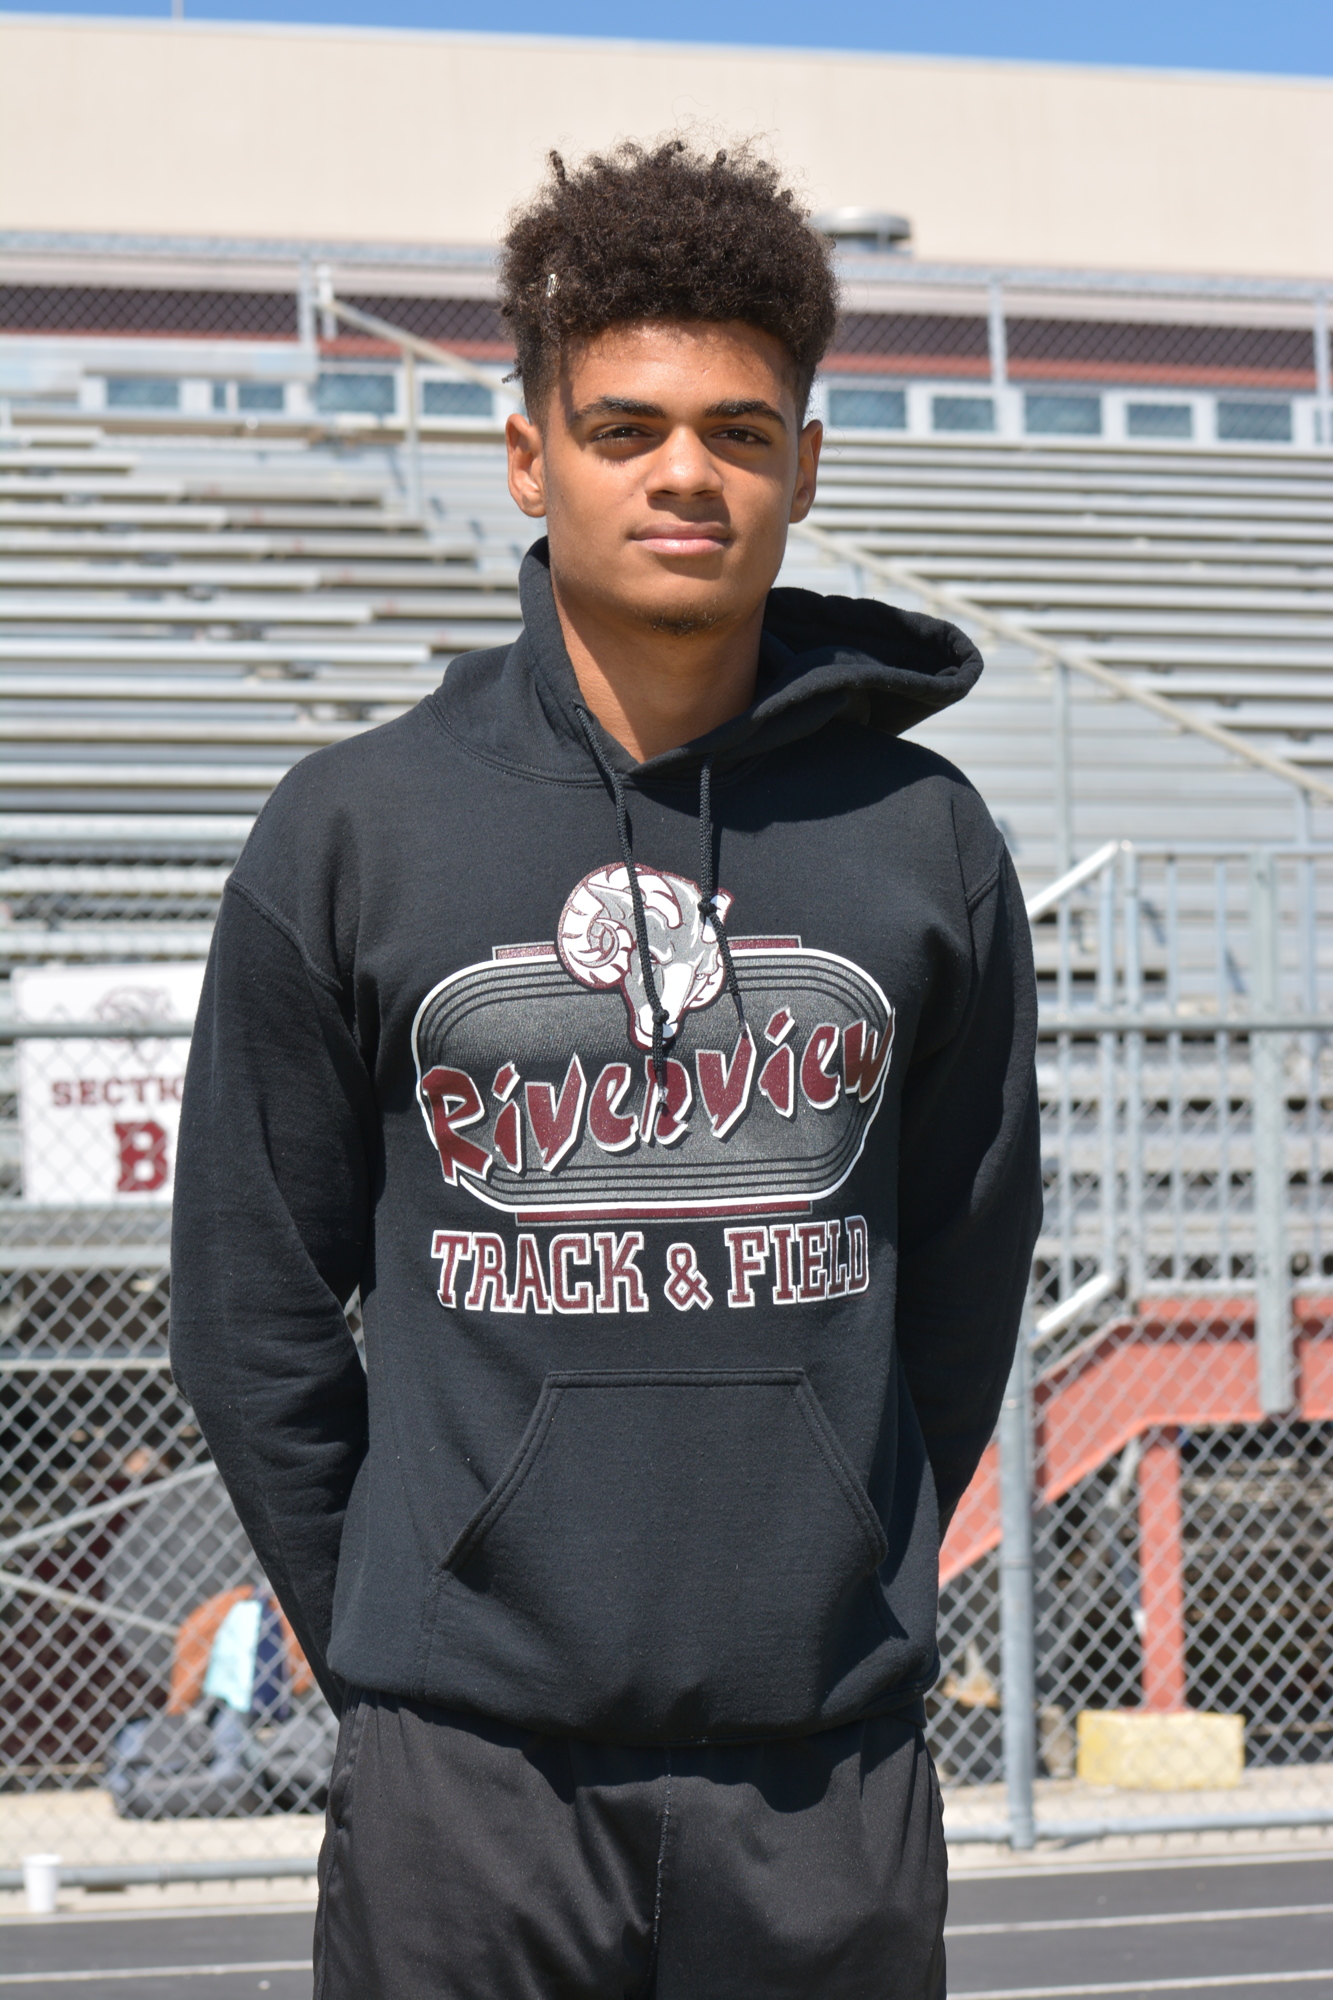 Tyler Dunigan joined the Riverview High track team as a senior, and won five events at the Ram Invitational.